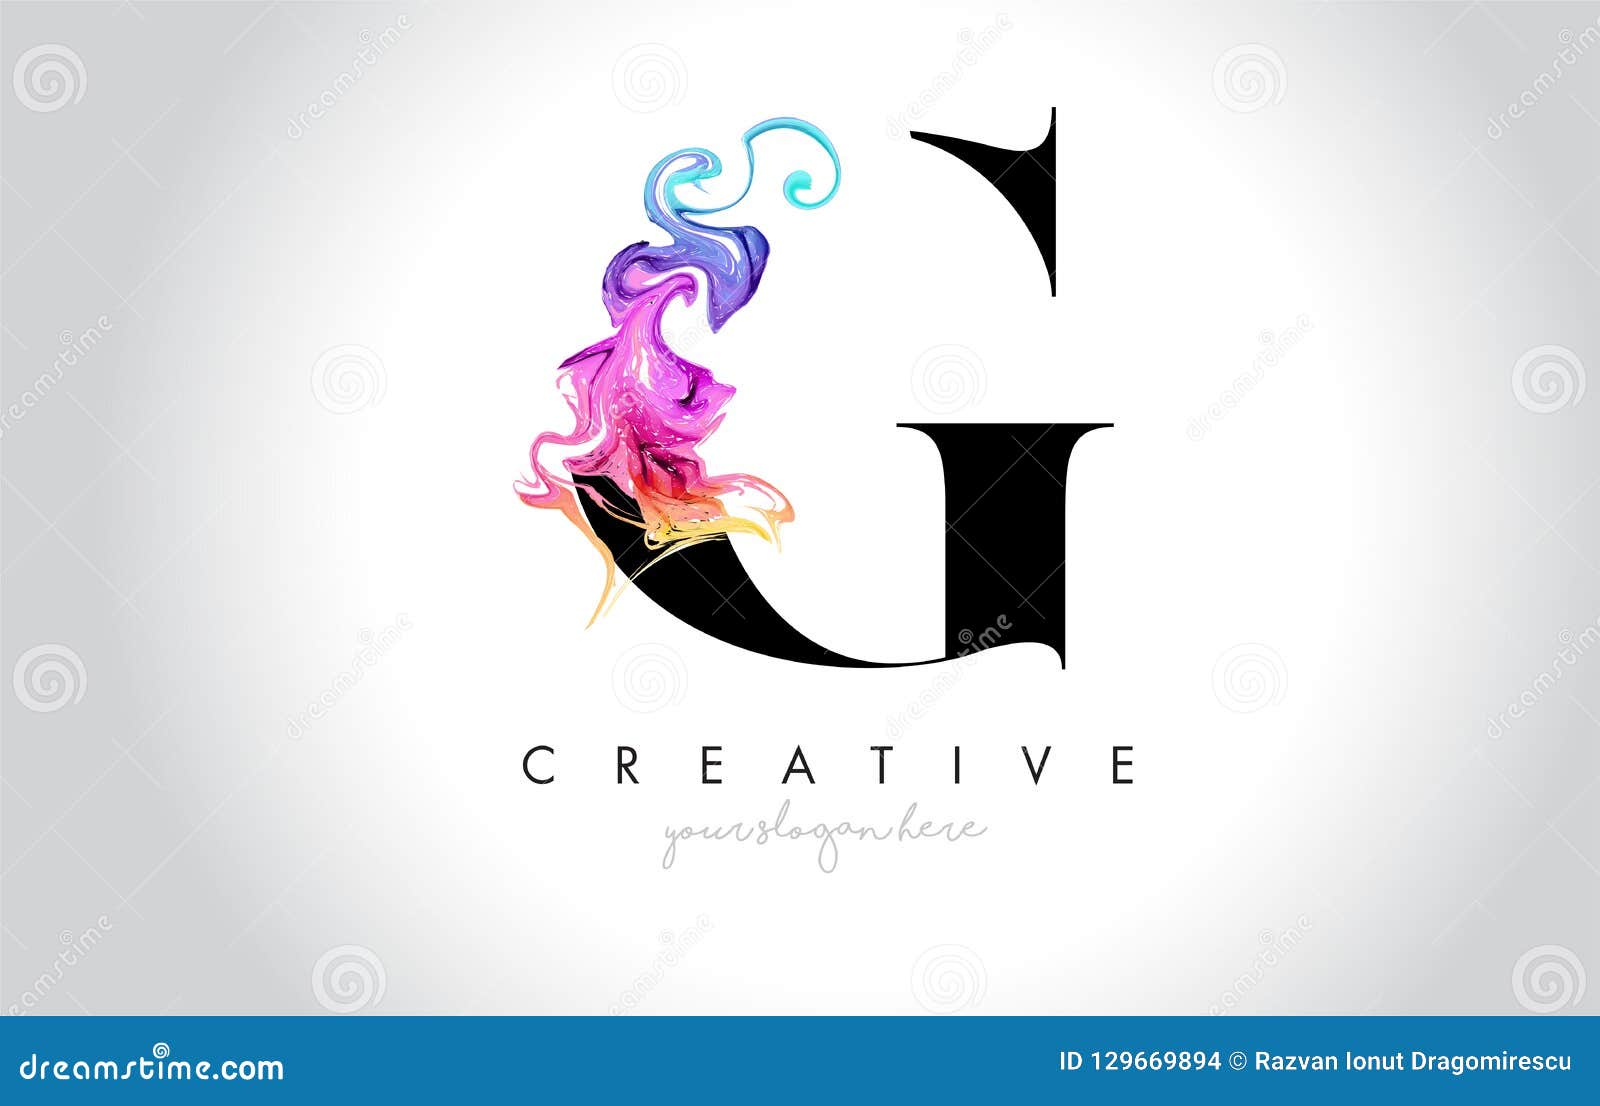 g vibrant creative leter logo  with colorful smoke ink flo